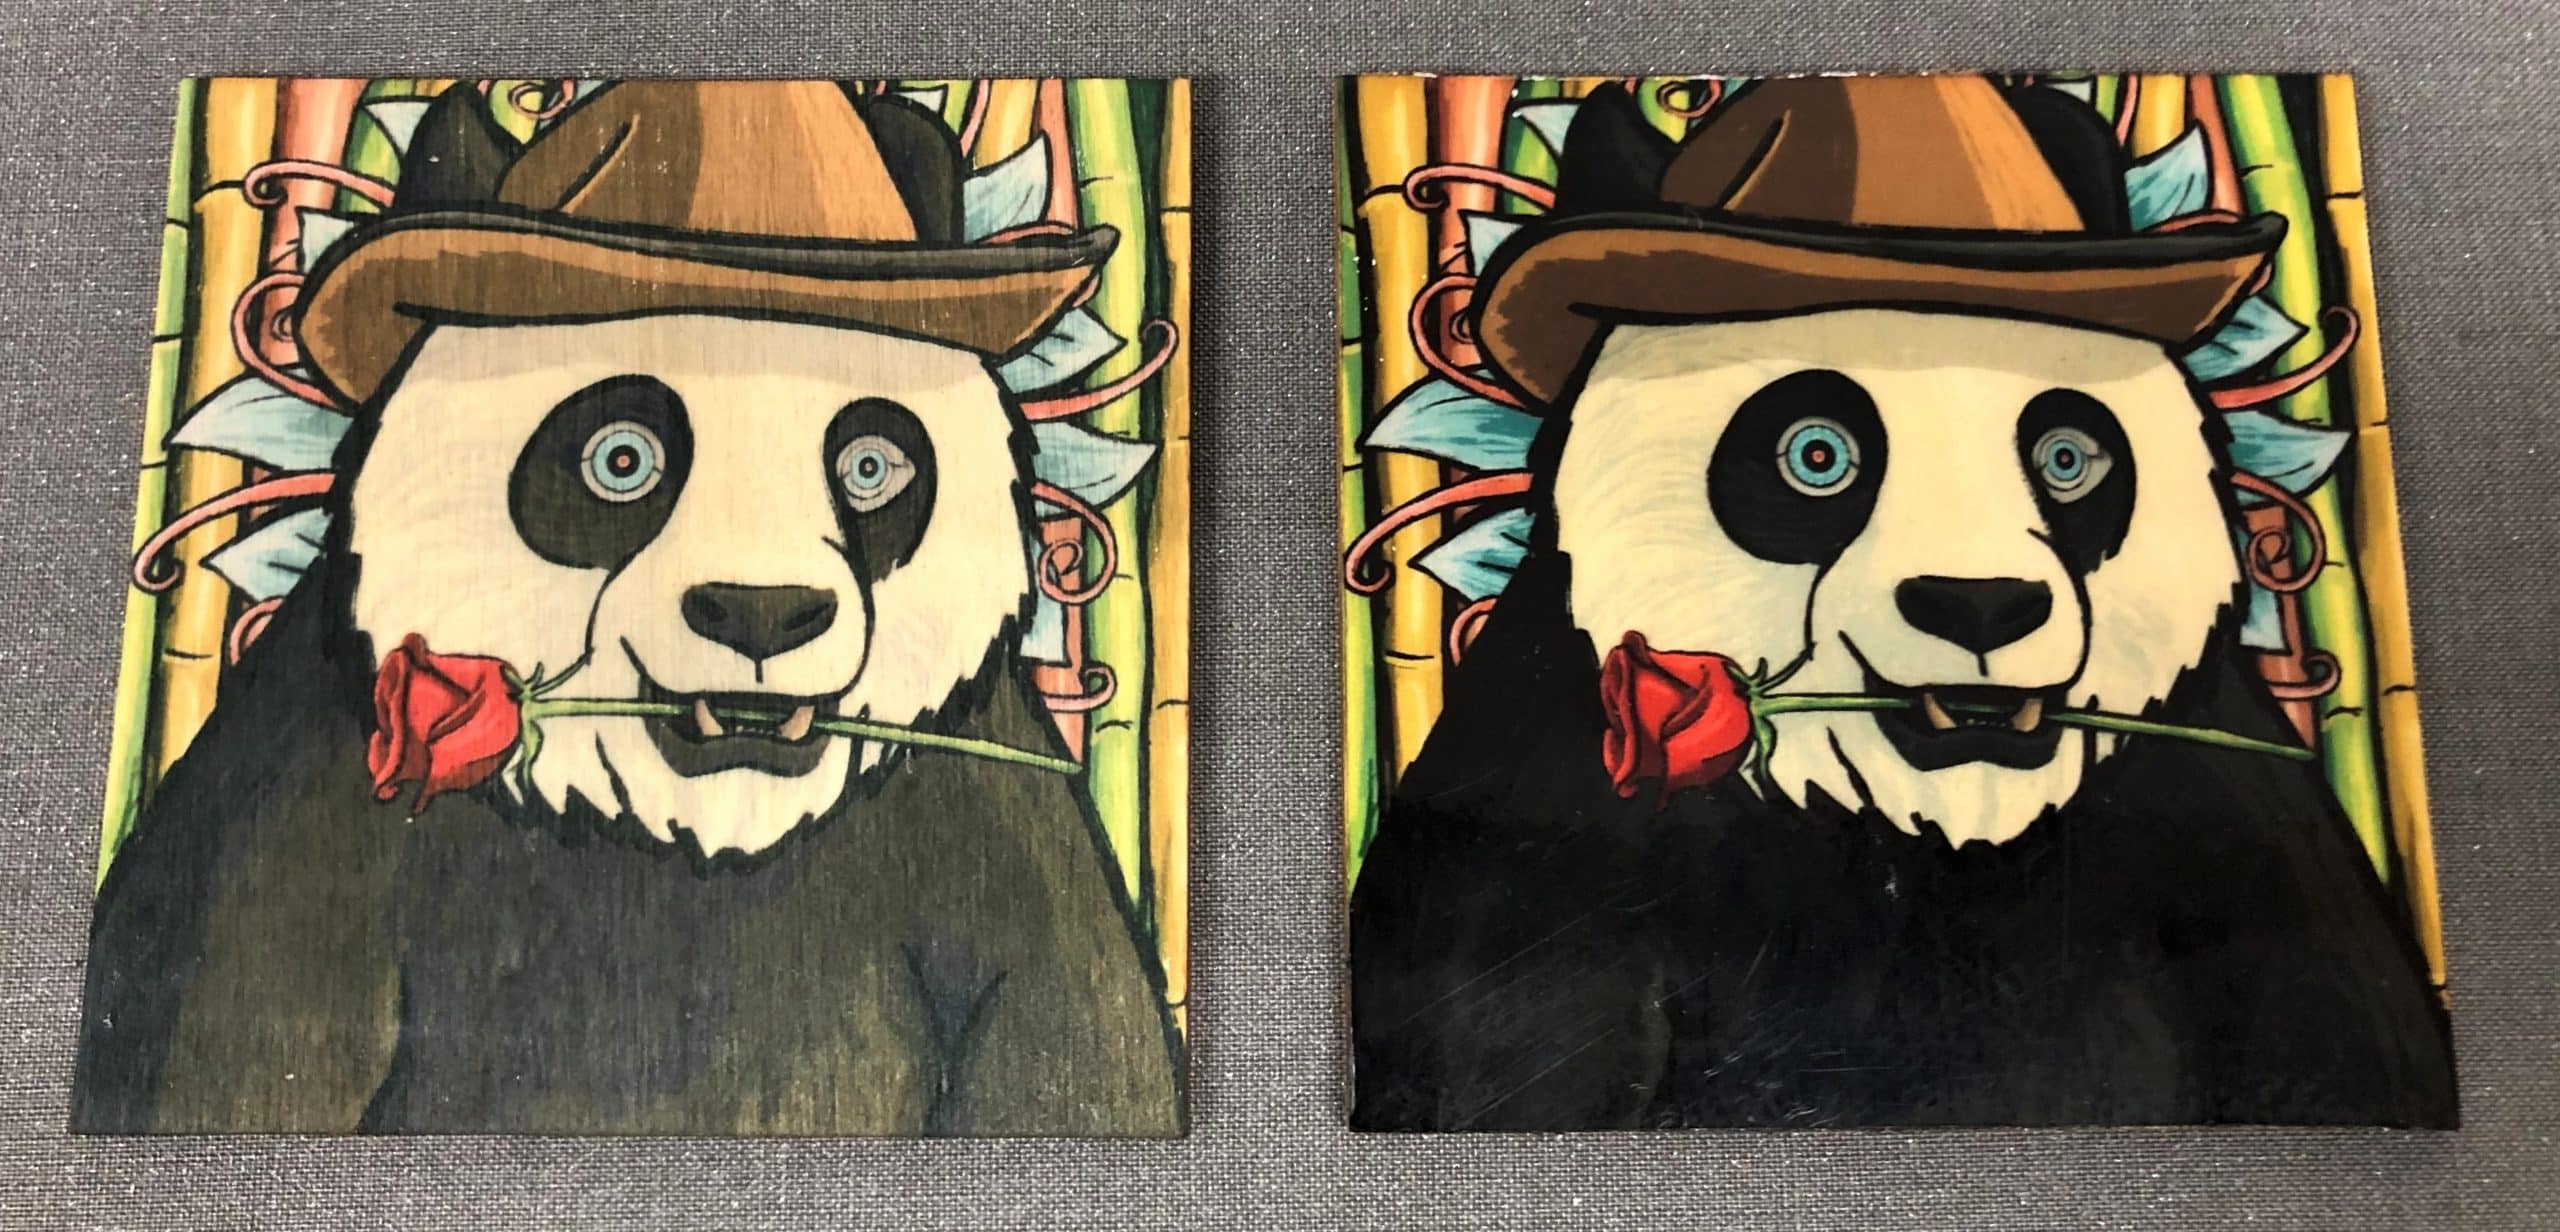 This images shows a finished sublimation project printed on wood tiles. The art is of a panda bear wearing a fedora with a red rose in its mouth and bamboo in the background.